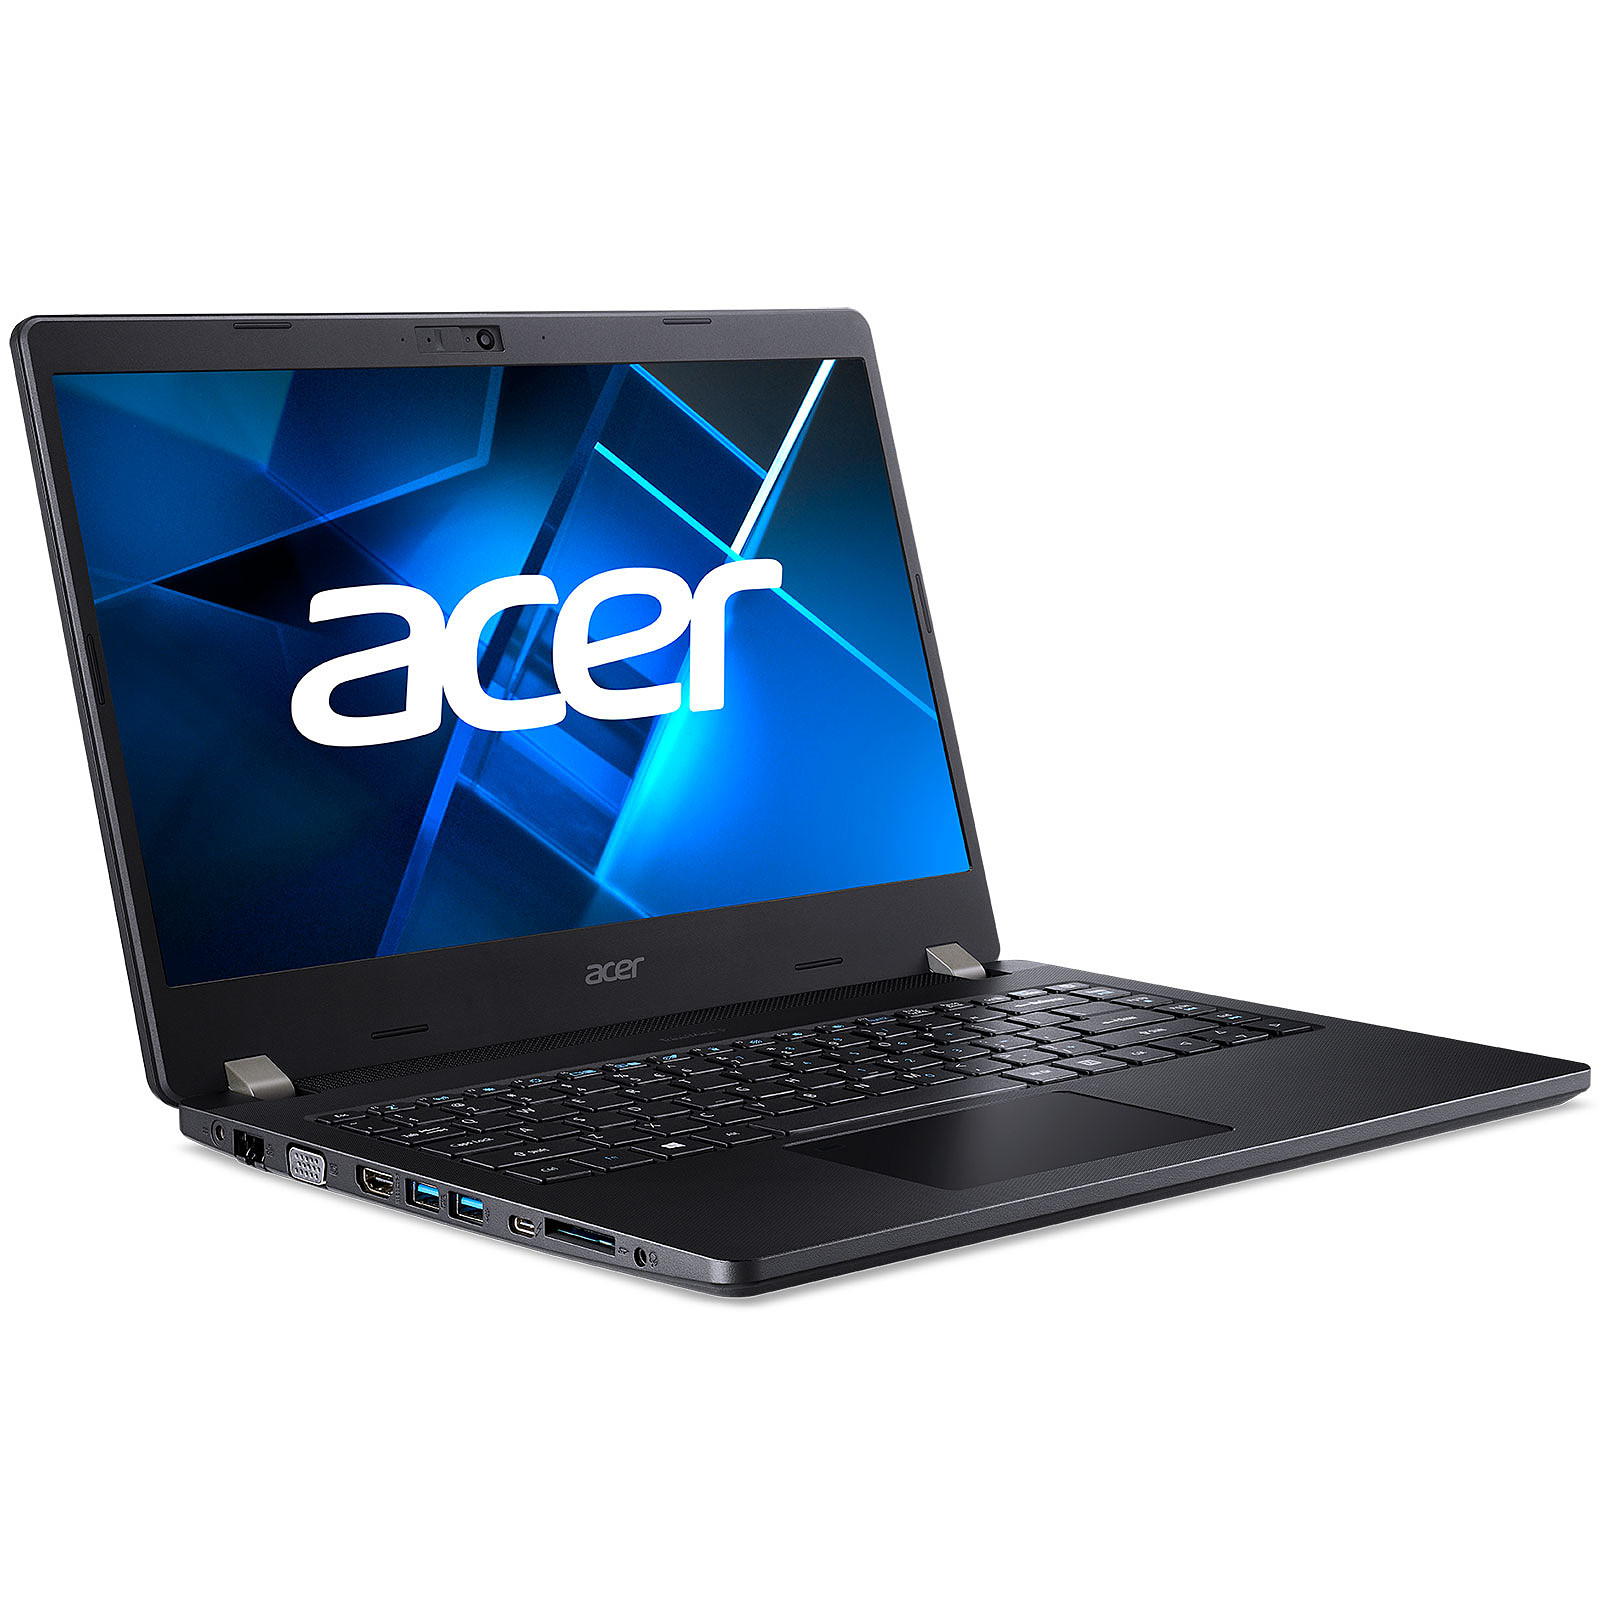 Acer TravelMate P214-53-5543 - PC portable Acer